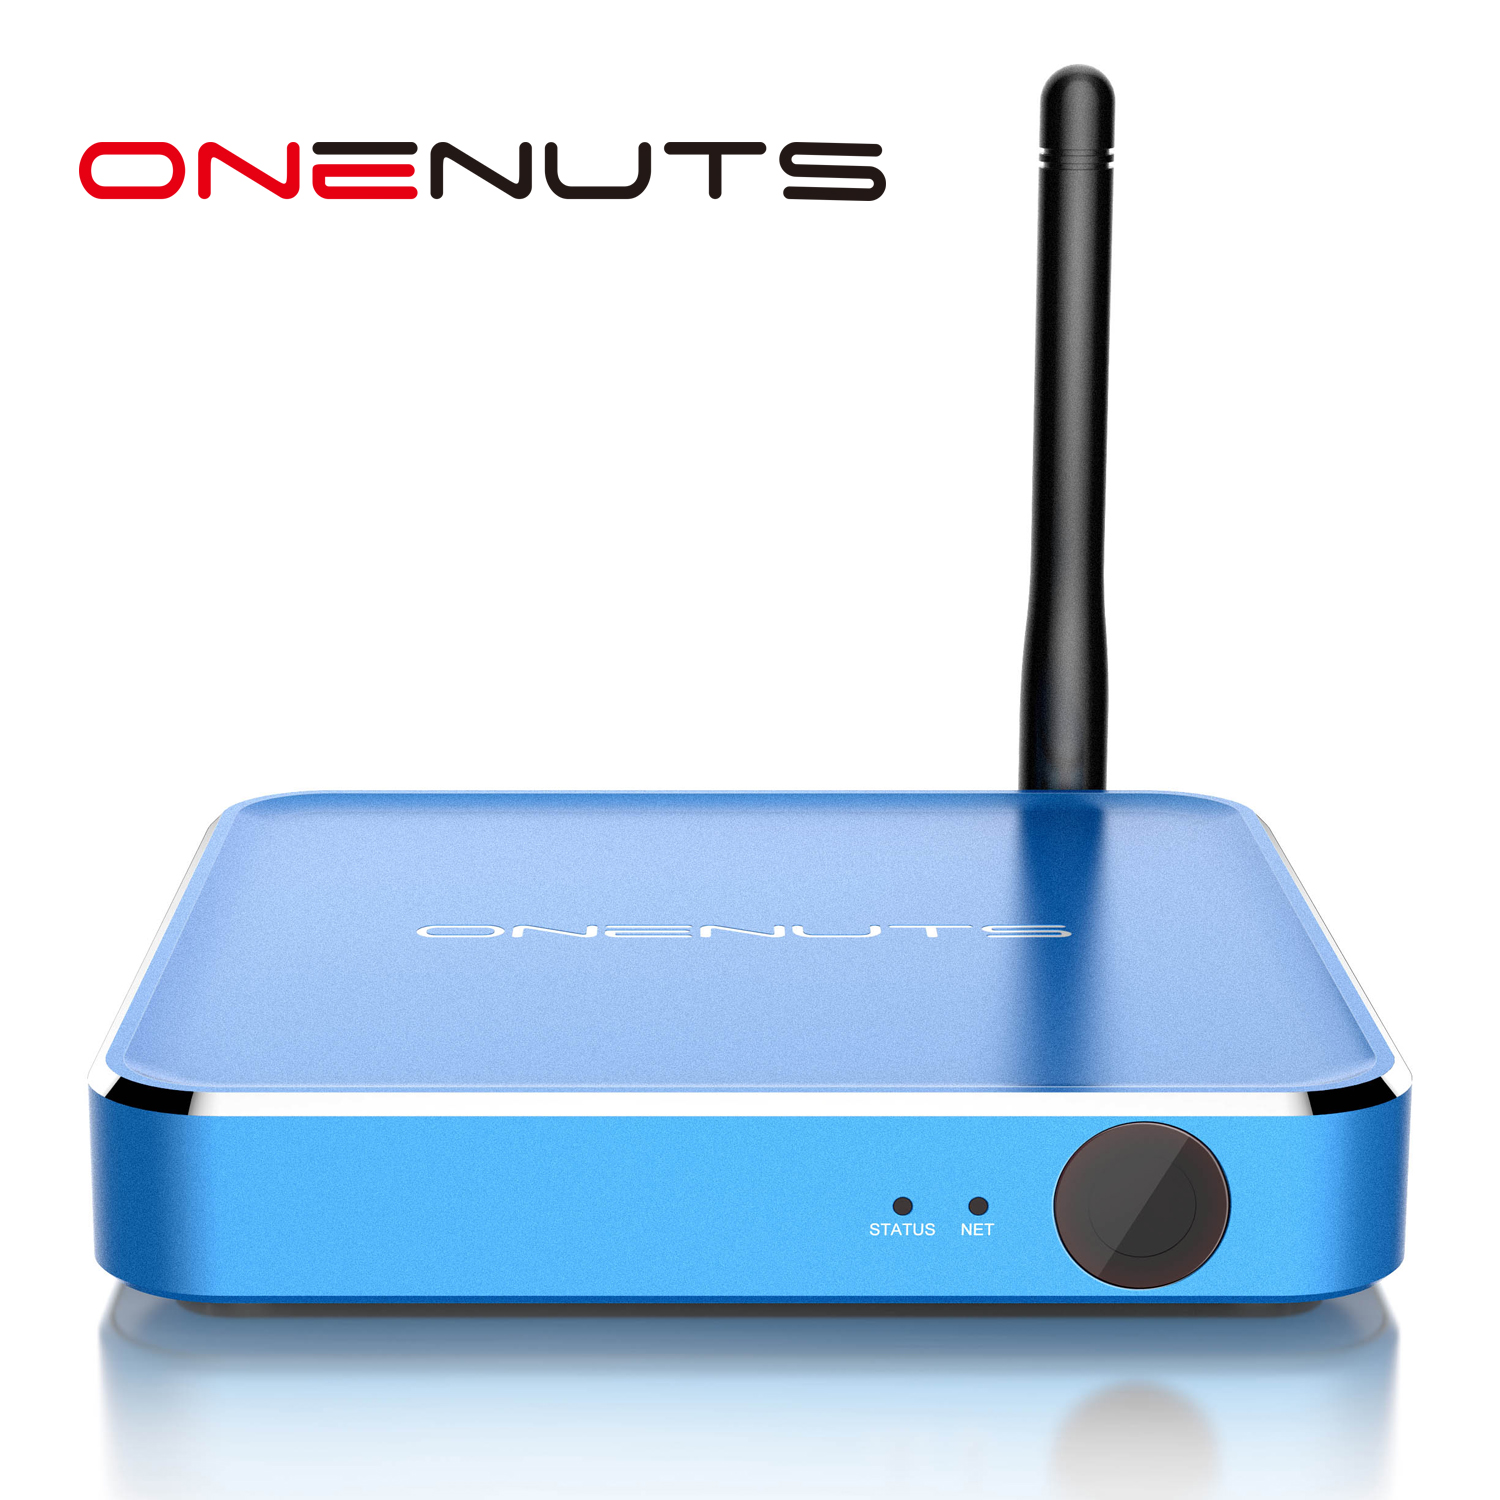 Neue Android TV Box mit Android 6.0, Network Media Player